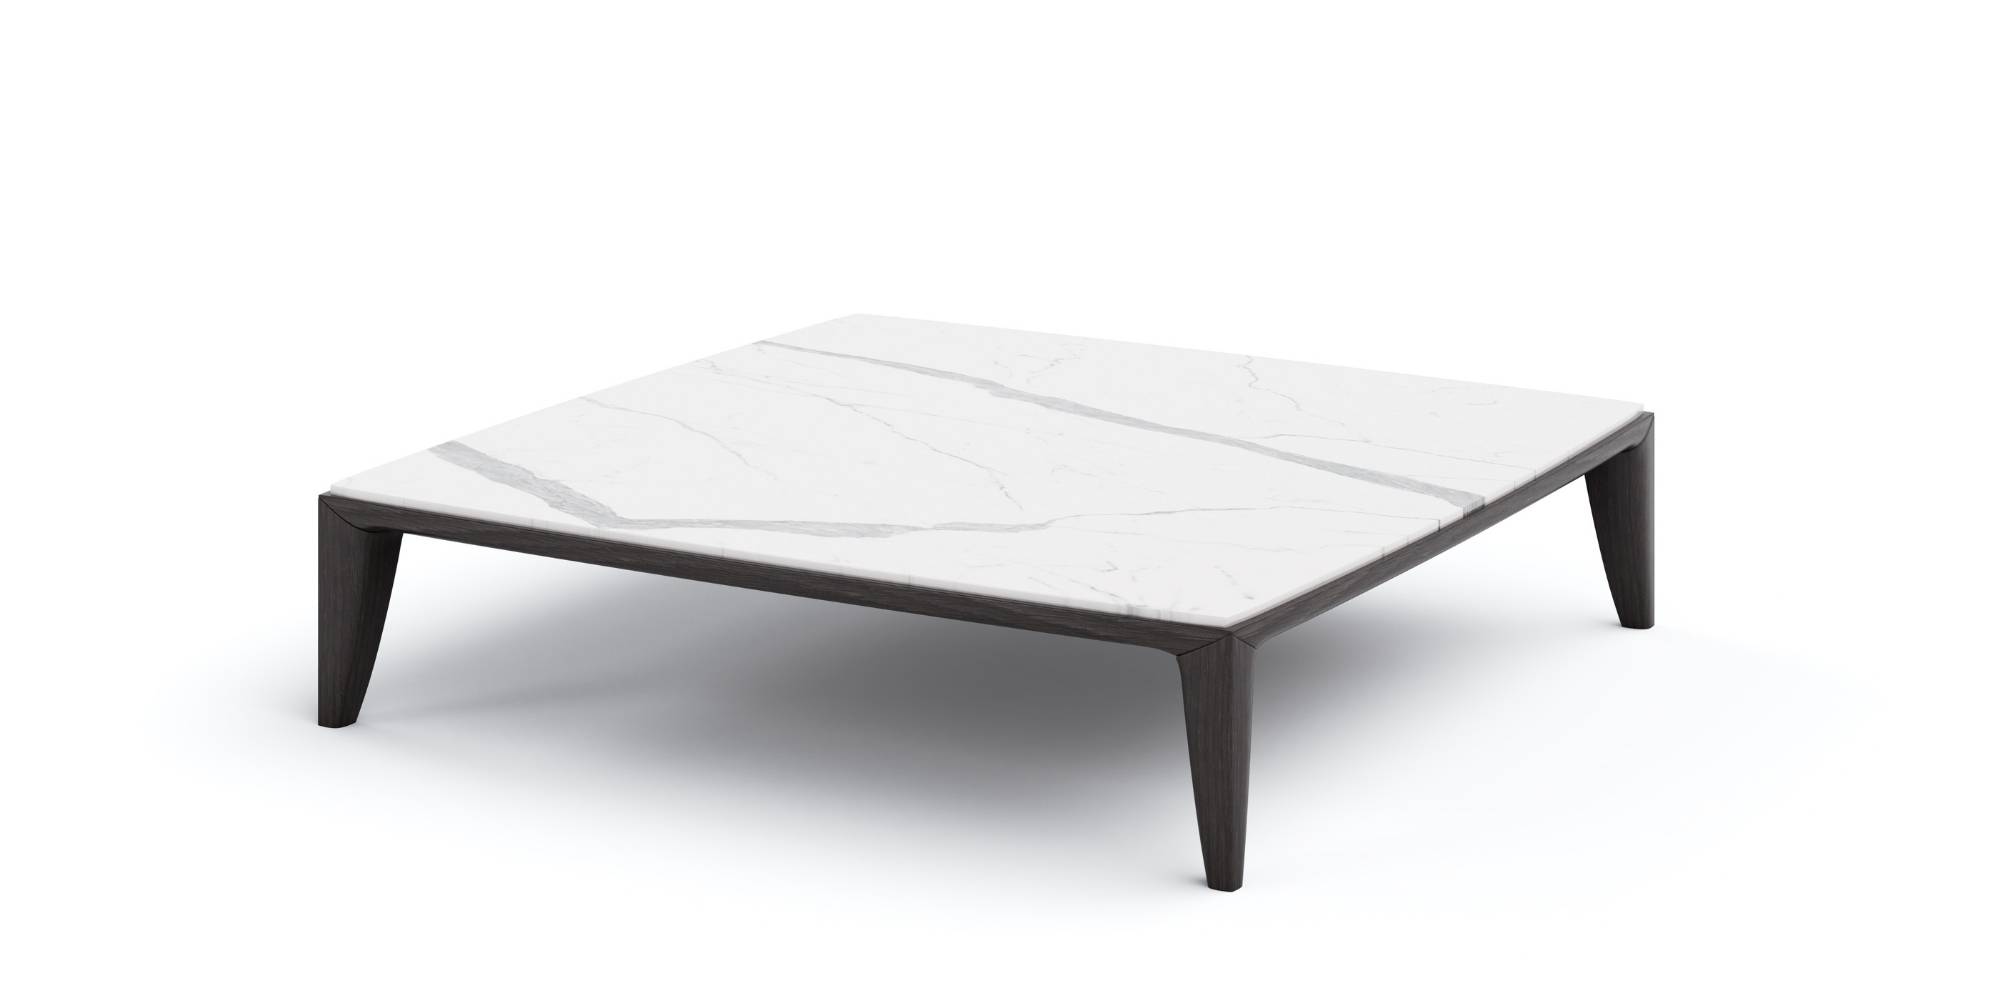 Aquila Nest of tables in Outdoor Tables Coffee Tables for Asteri Lusso collection